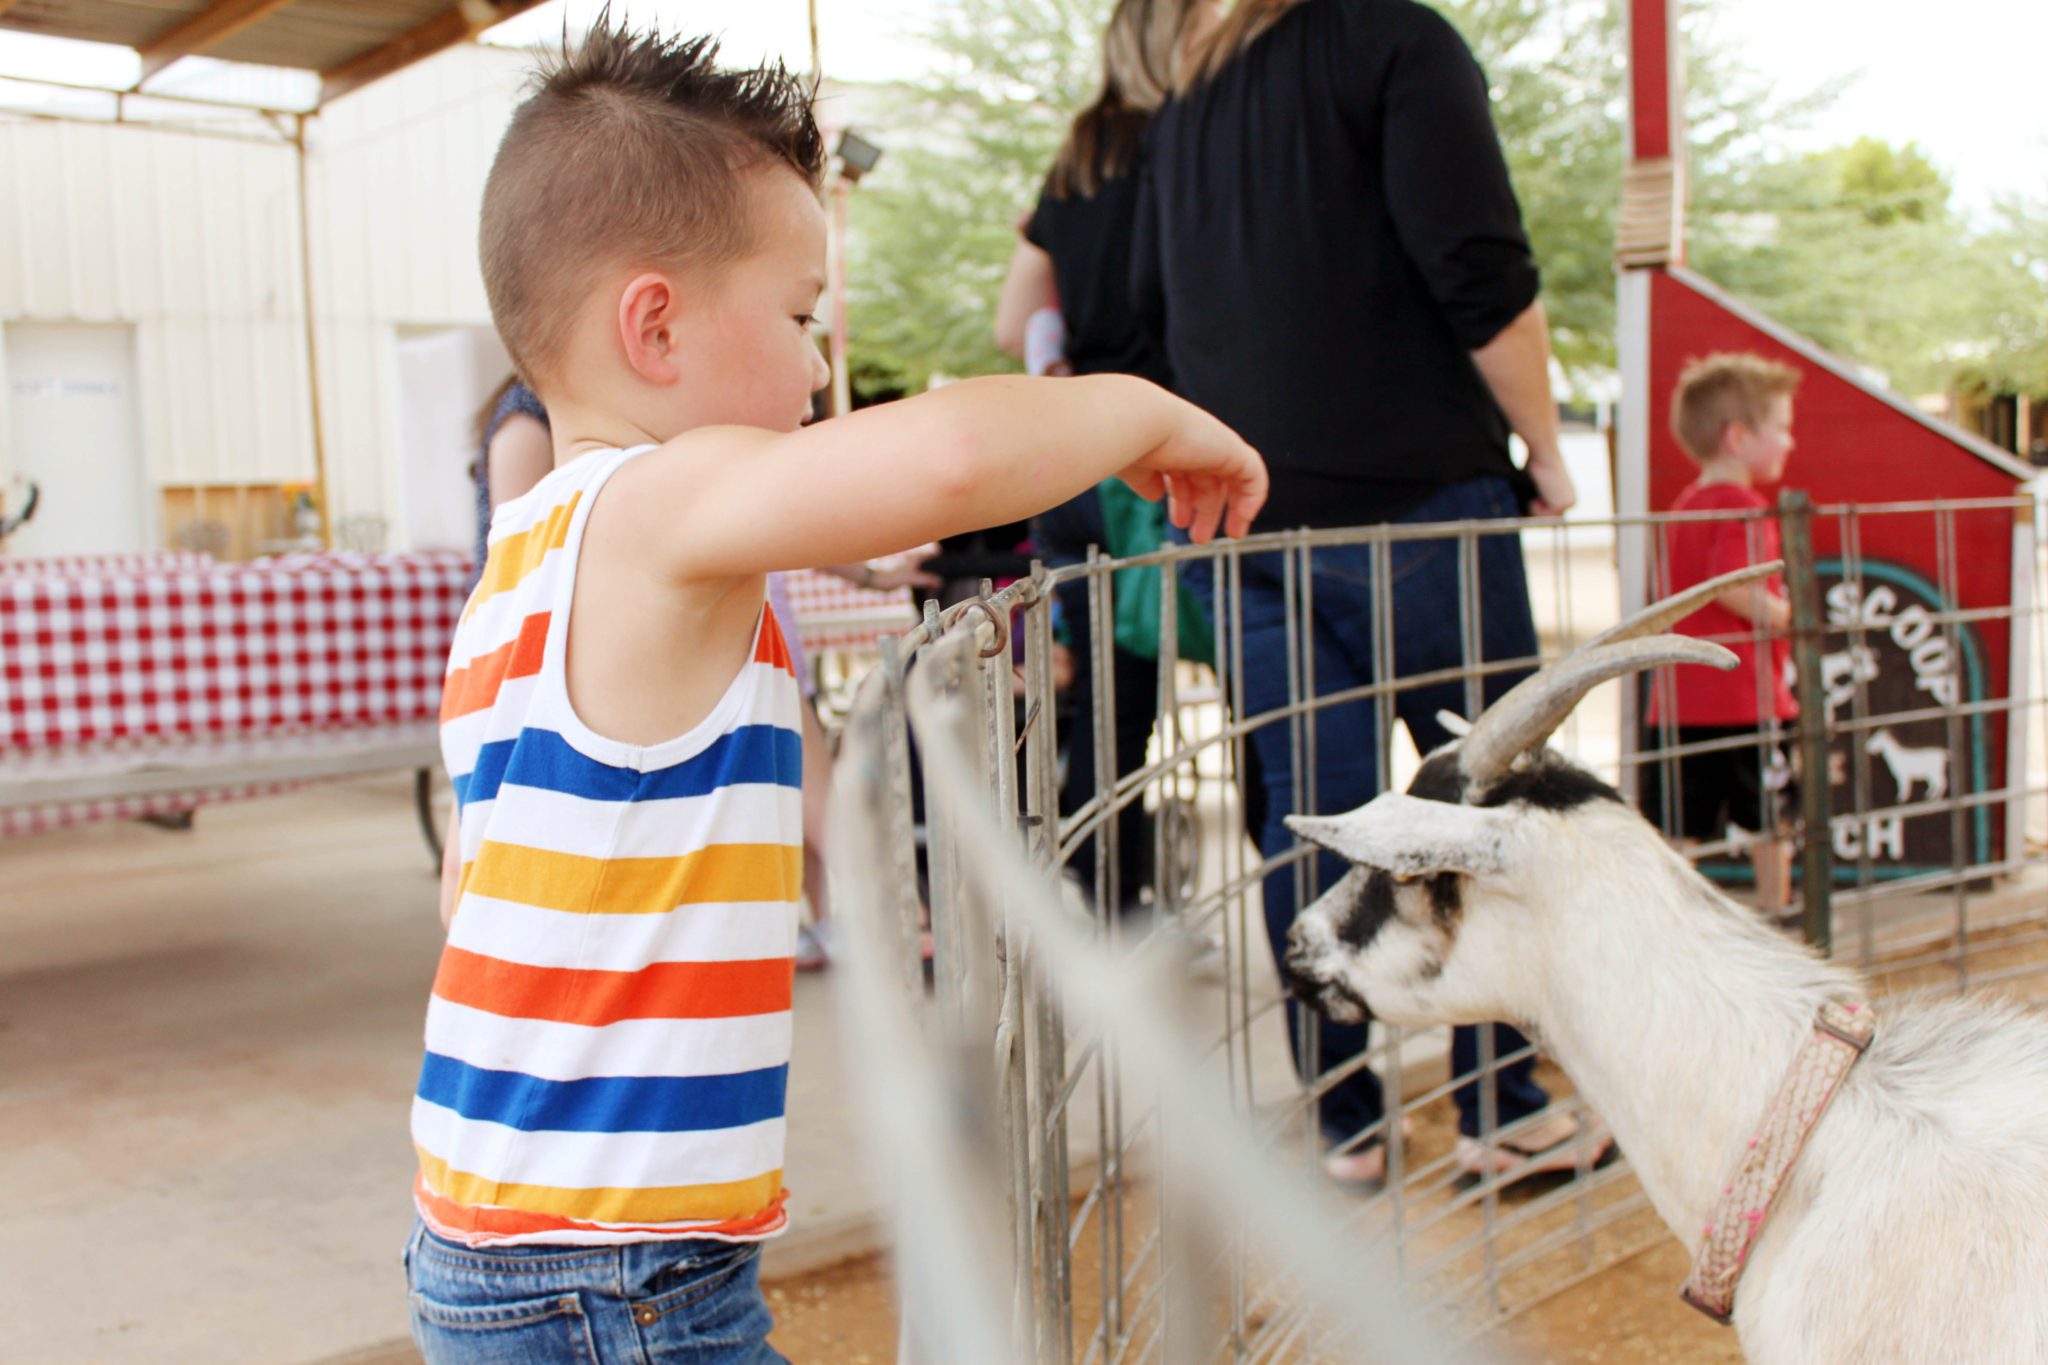 Best nature and animal encounters for kids in Phoenix and the East Valley-101 East Valley and Phoenix Kids activities #phoenix #arizona #superstitionfarms